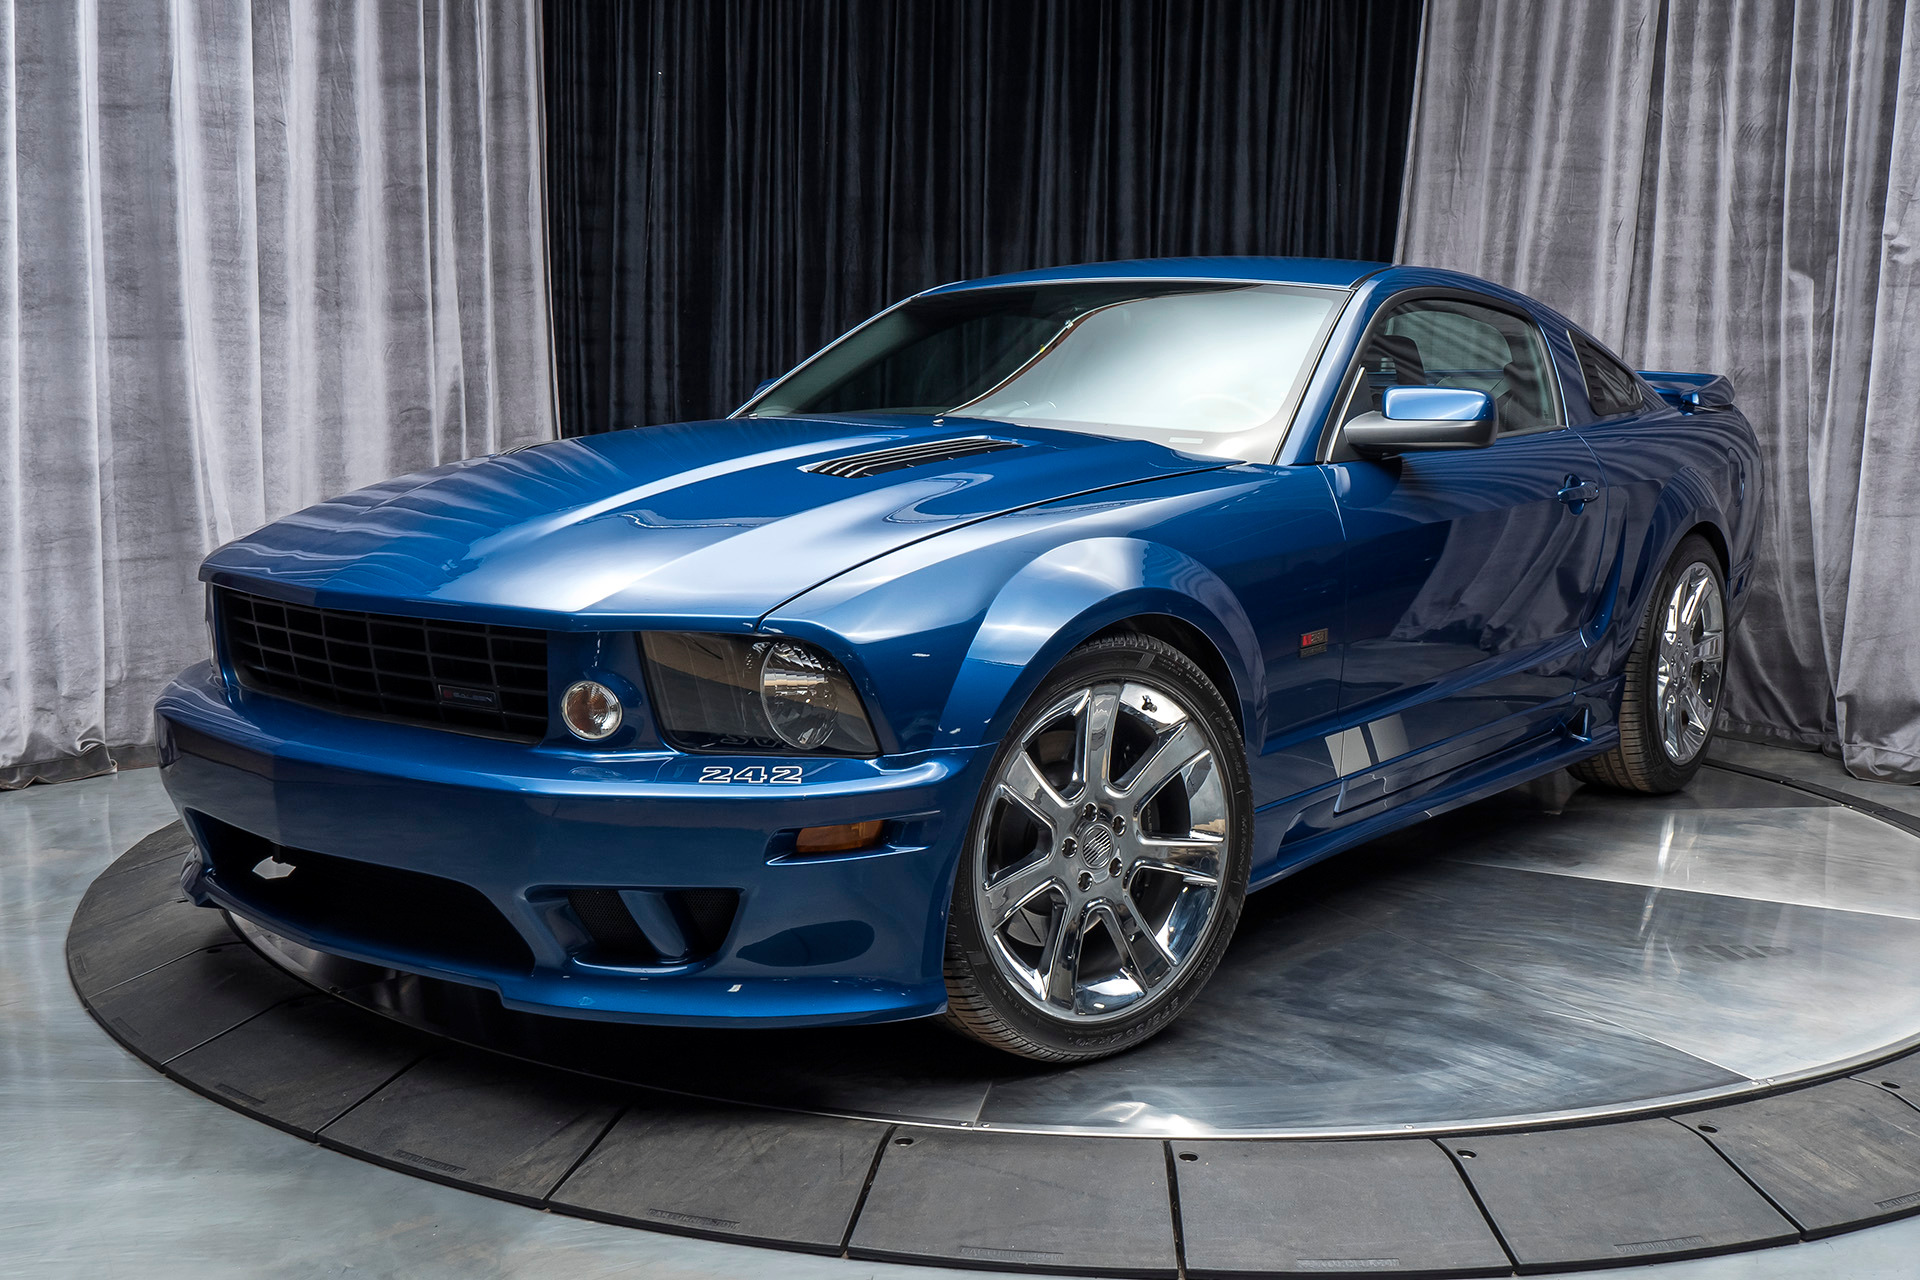 Used-2008-Ford-Mustang-Saleen-S281-Supercharged-Coupe-ONLY-10K-MILES-1-of-9-MADE